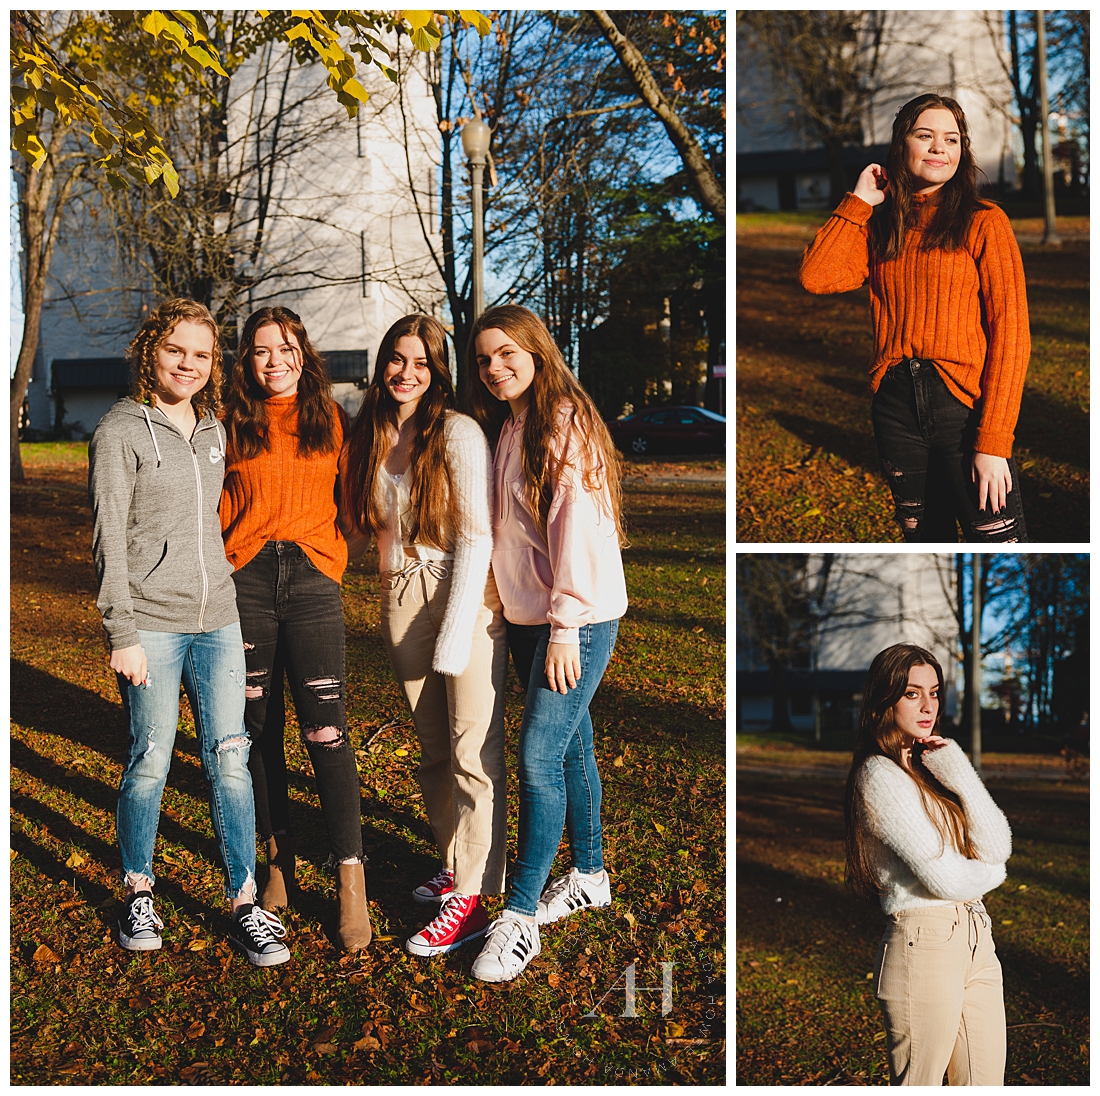 The Best Fall Outfits for Autumn Senior Portraits | Pose Ideas for High School Senior Girls, Outfit Ideas, How to Layer Outfits, Wright Park Portraits | Photographed by the Best Tacoma Senior Photographer Amanda Howse